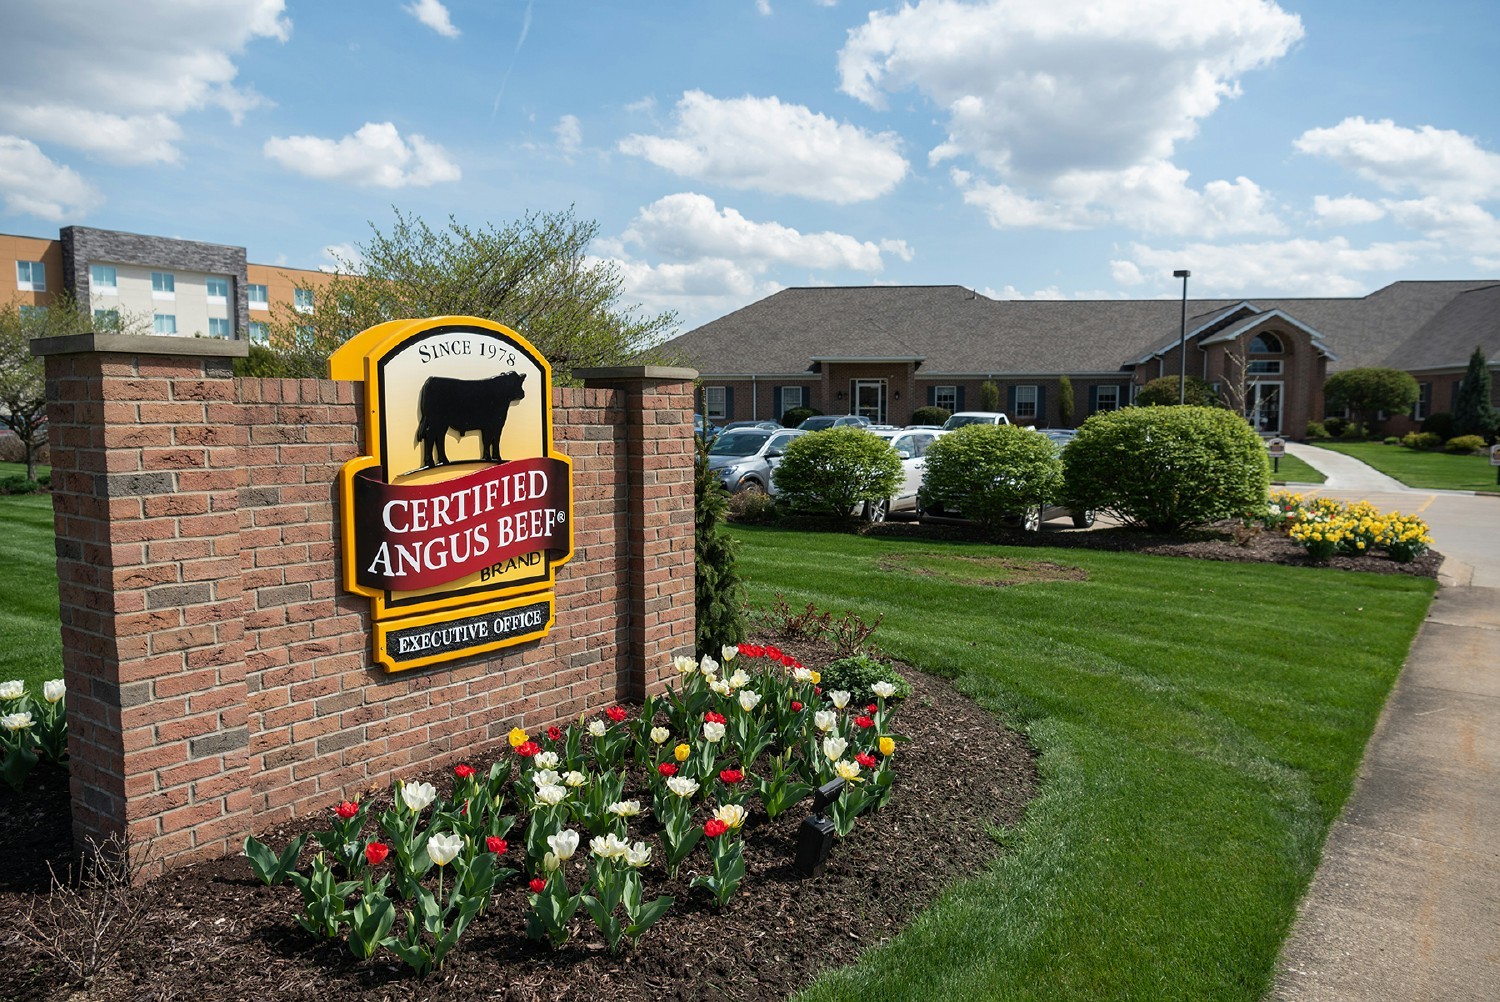 Based in Wooster, Ohio, Certified Angus Beef is owned by family farmers and ranchers